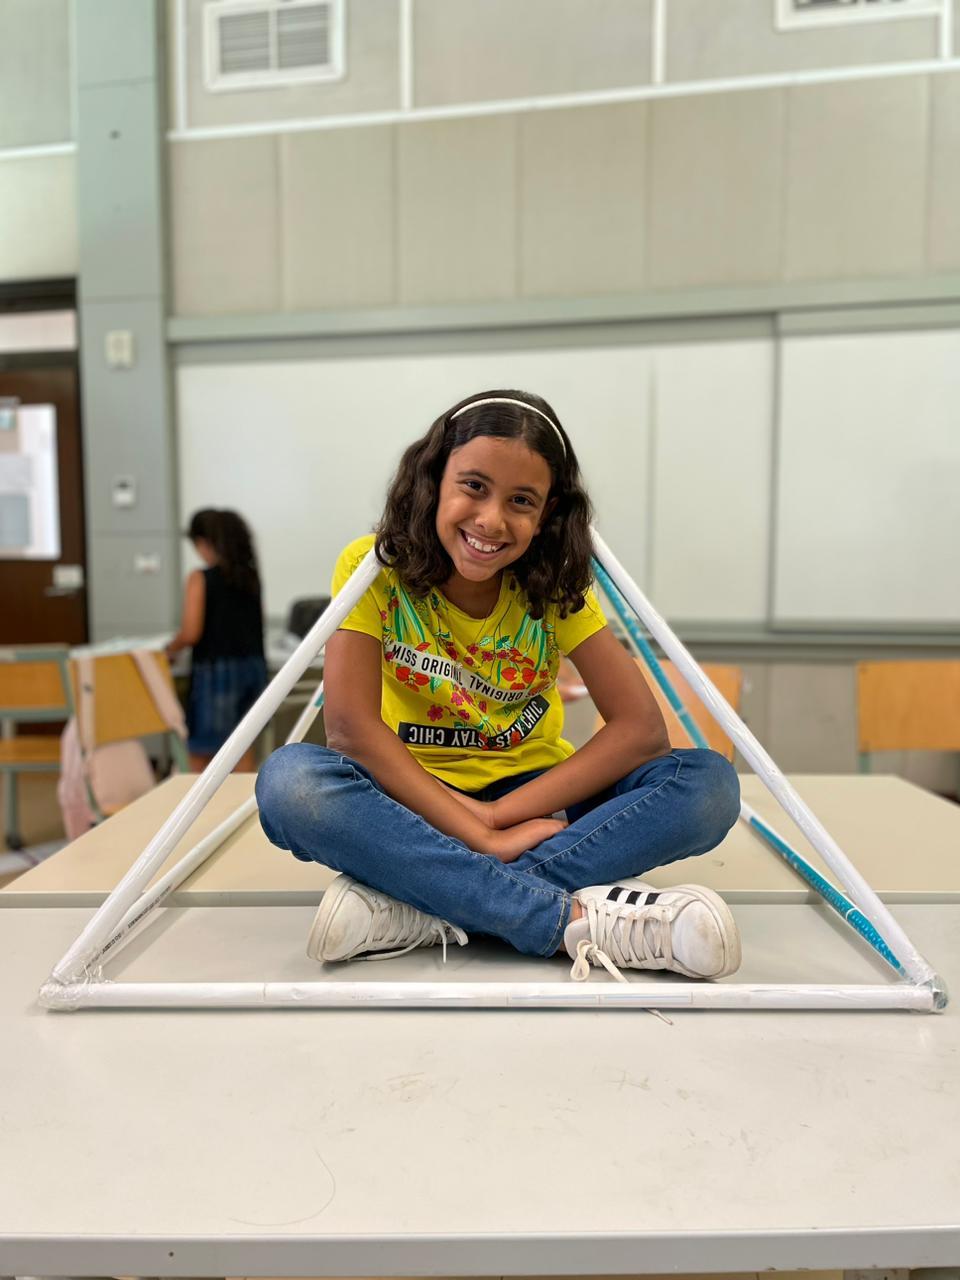 A young student sitting on a desk with a pyramid wrapped around her made out of resourceful materials